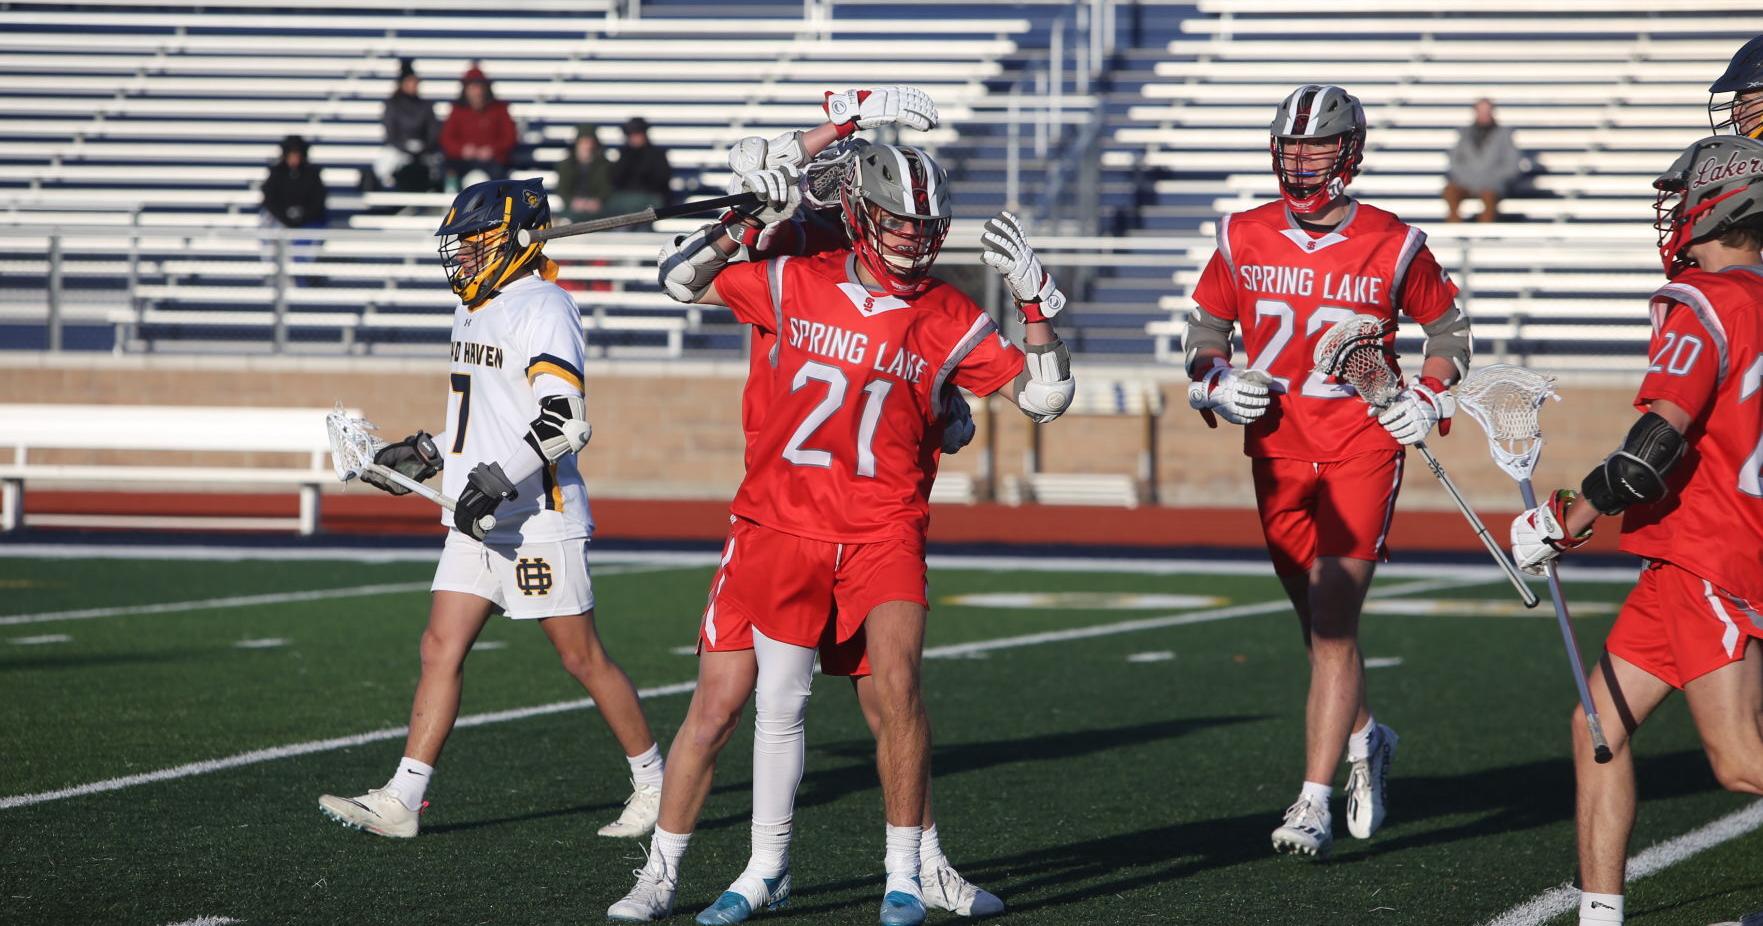 Laker boys hang on in final minutes for lacrosse win over Grand Haven